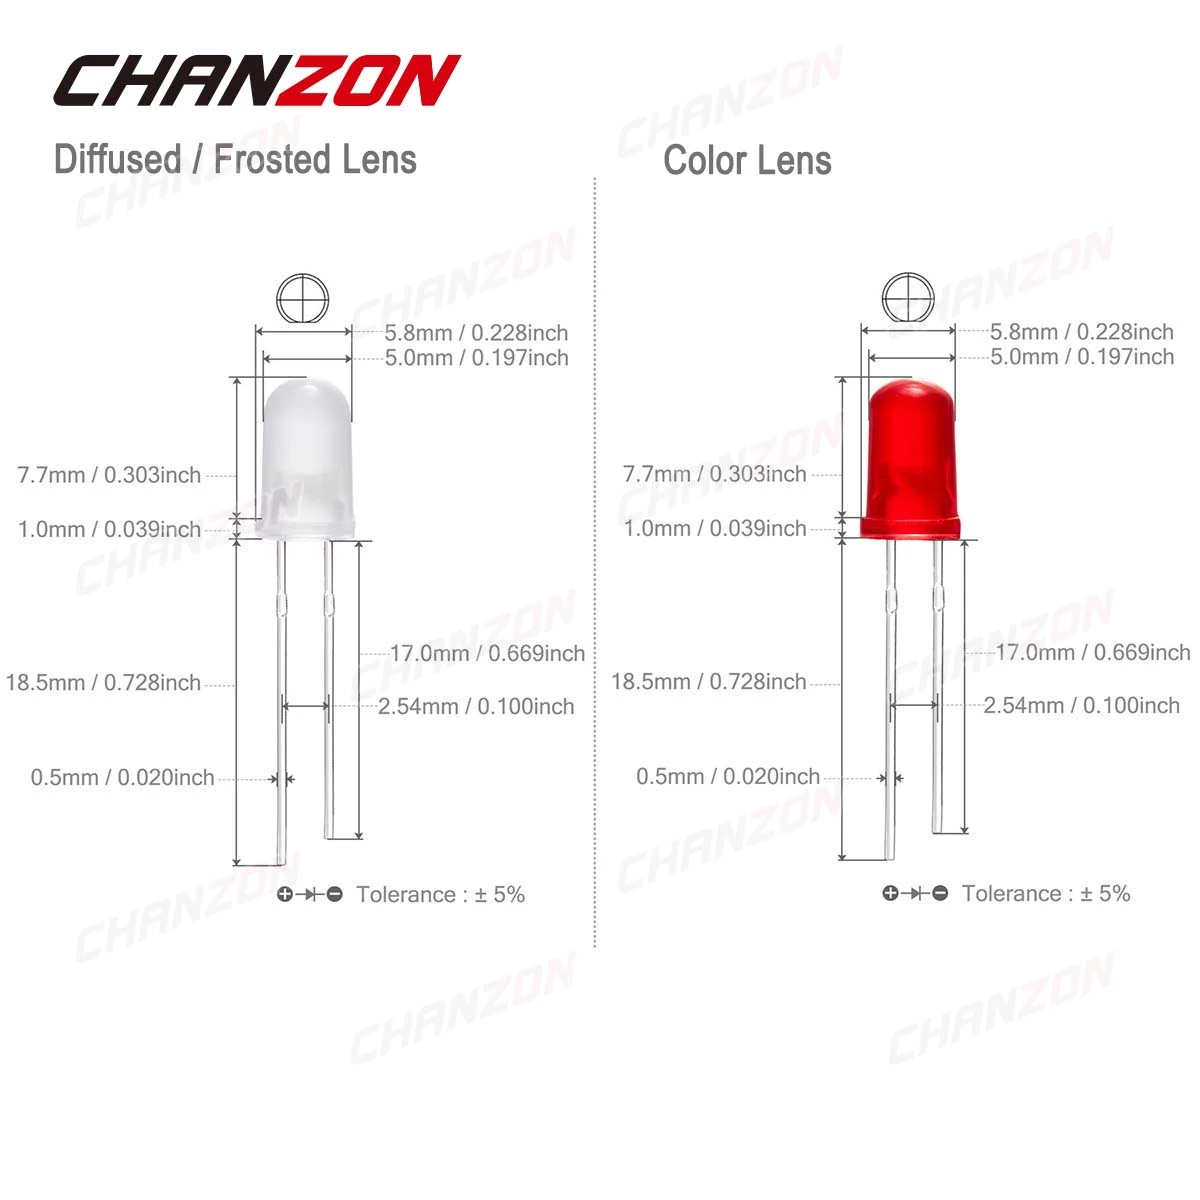 Chanzon 5mm Diffused LED Diode Lamp Light (Pack of 10)